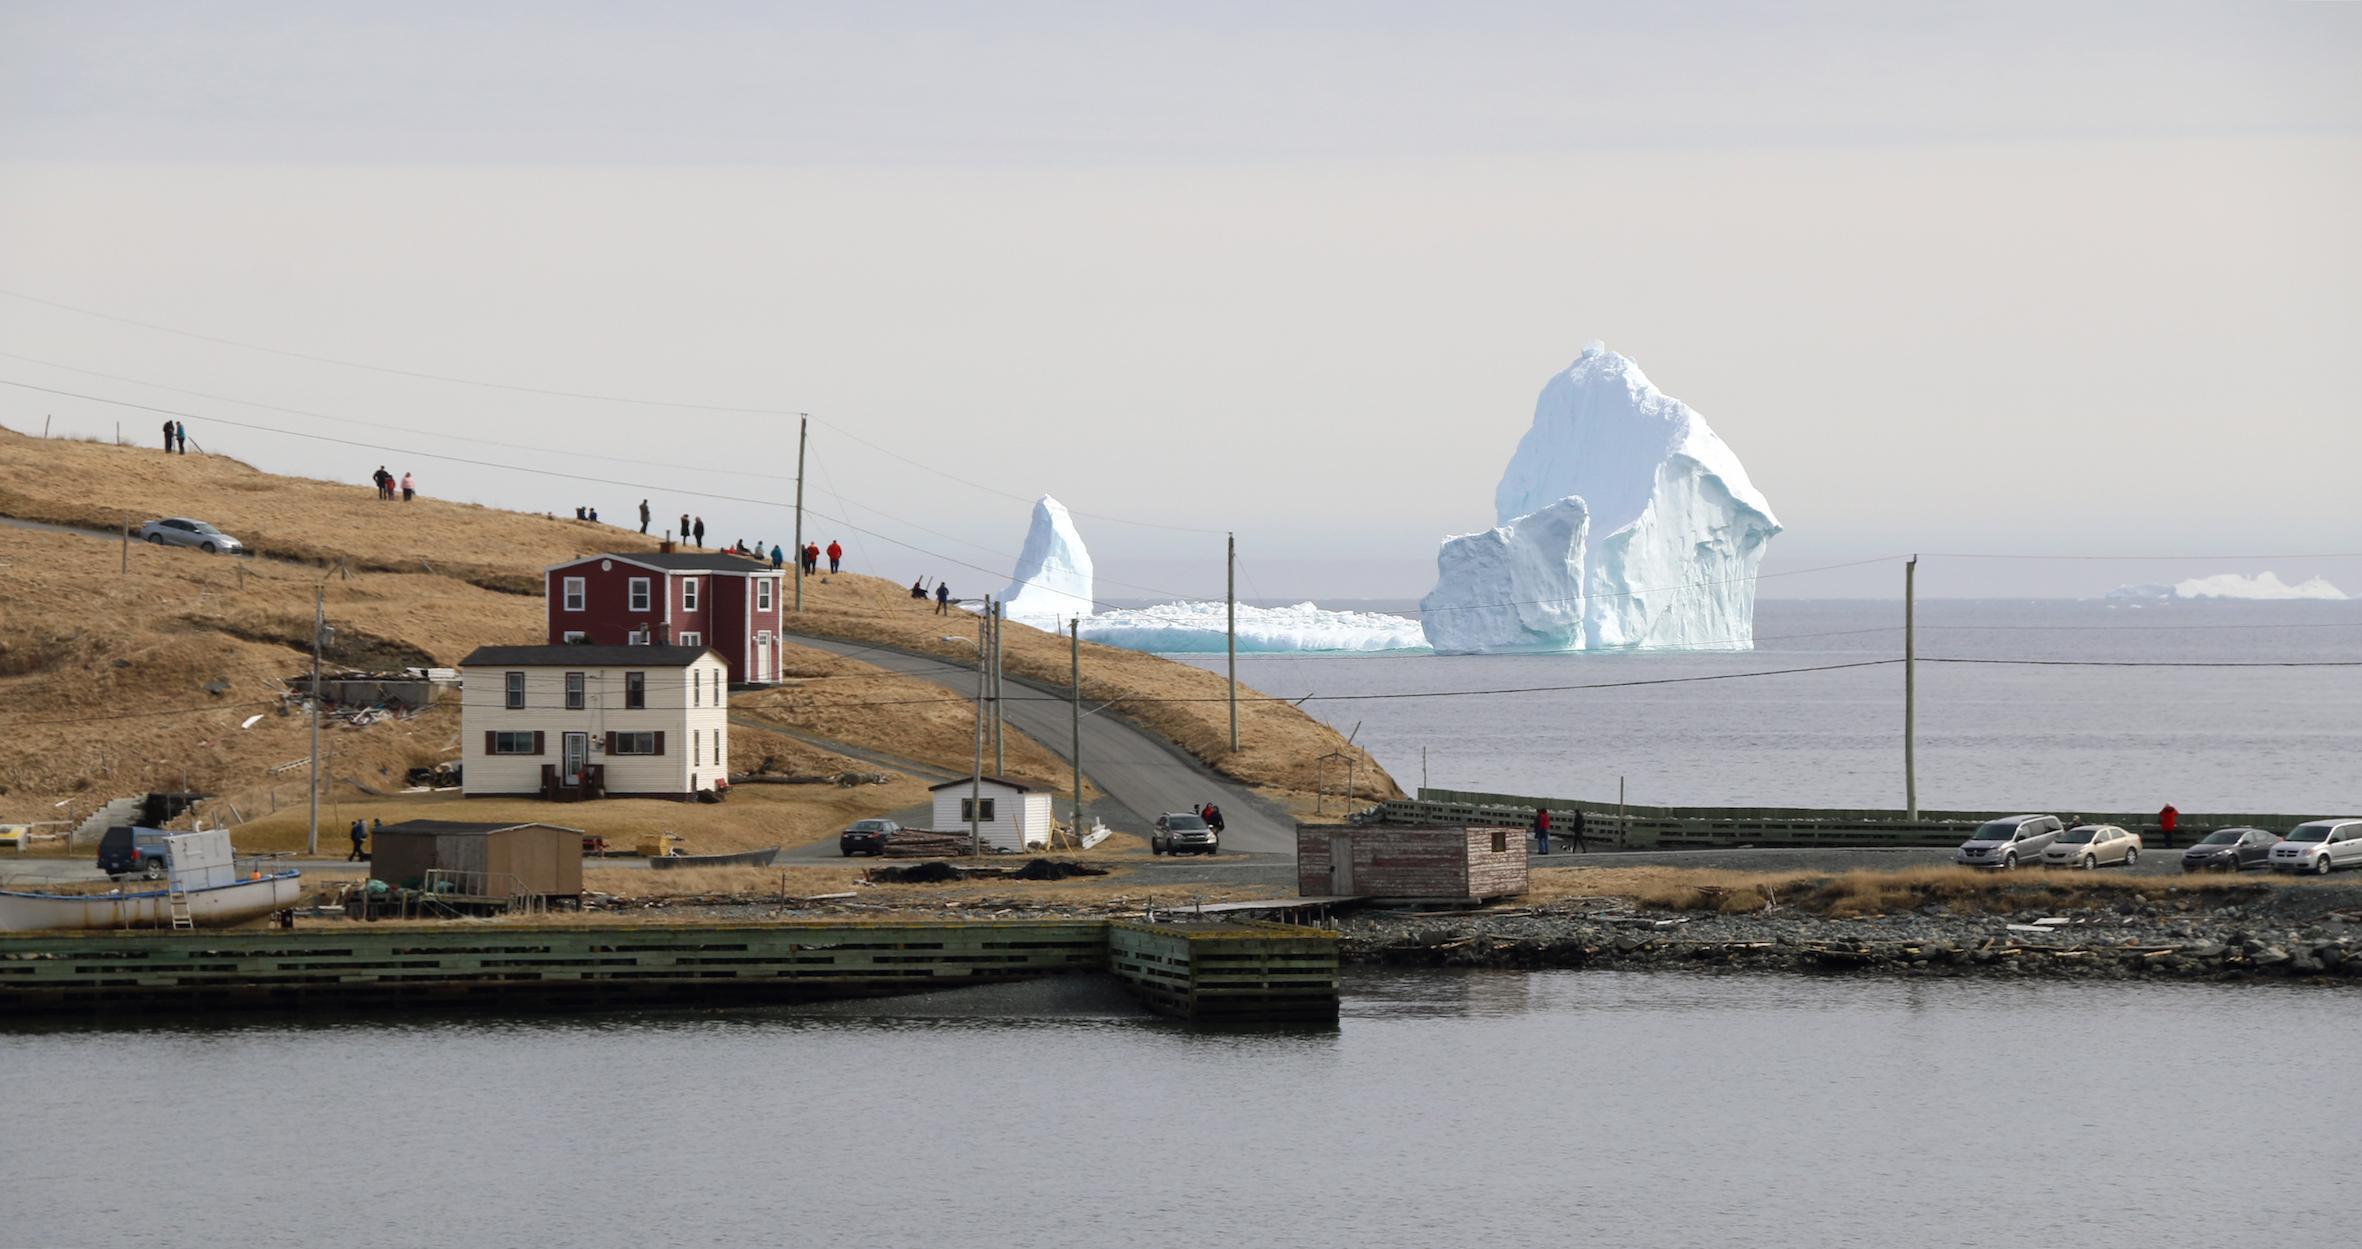 The Ferryland iceberg is so huge that you can feel its chill even miles away on the shore